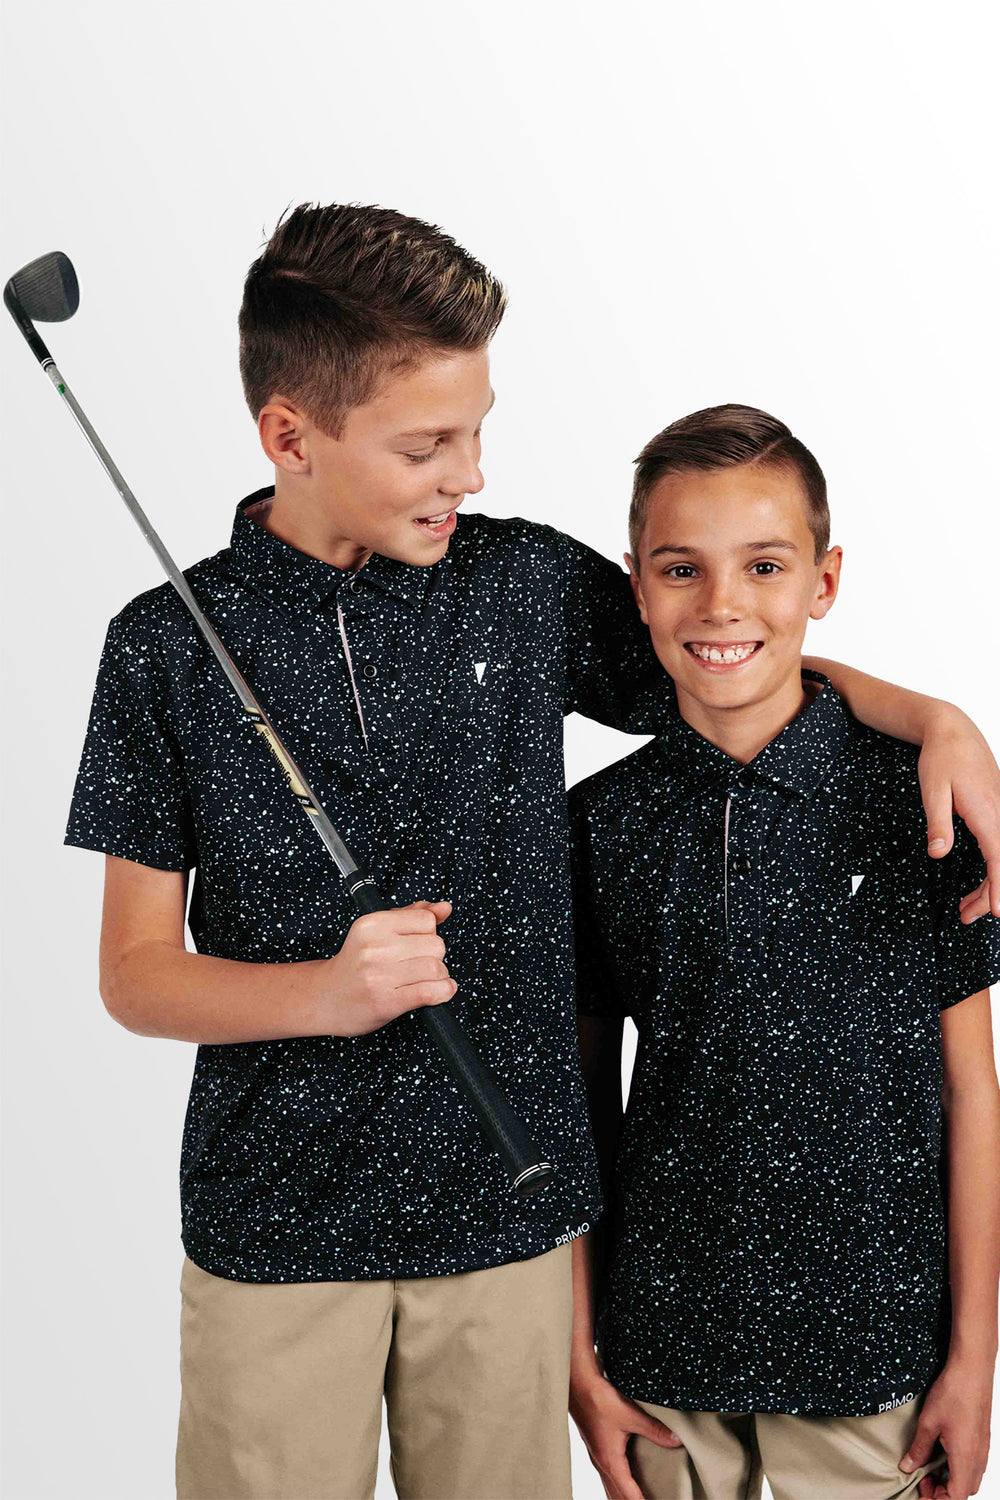 Primo Golf Apparel - Clothing for the Athletic Golfer